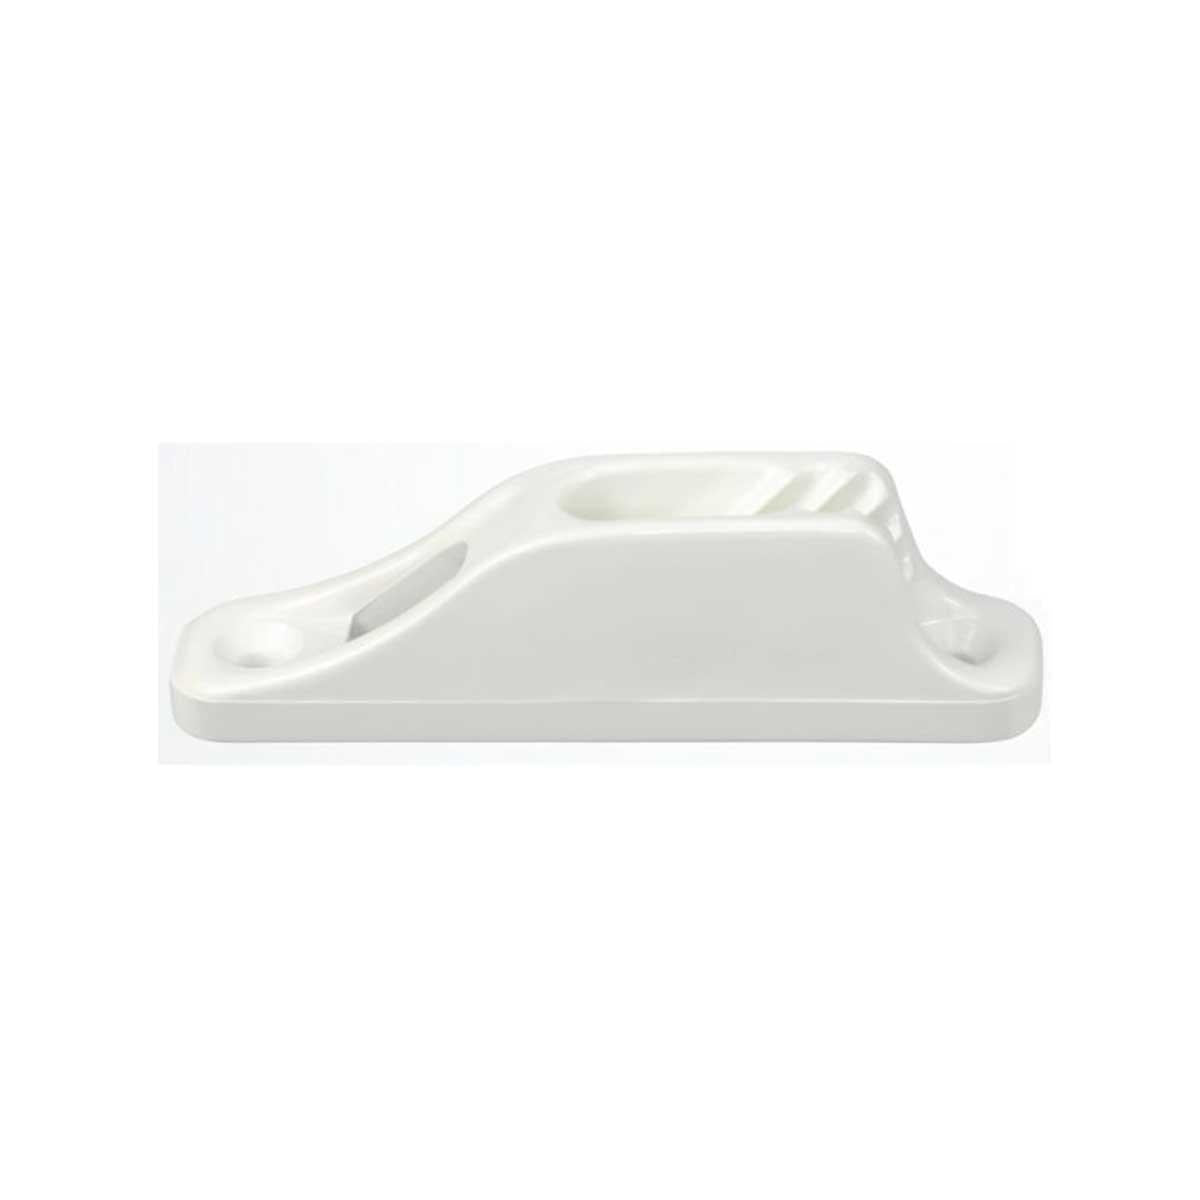 Clamcleat Junior Retail Cleat - White - CL203W